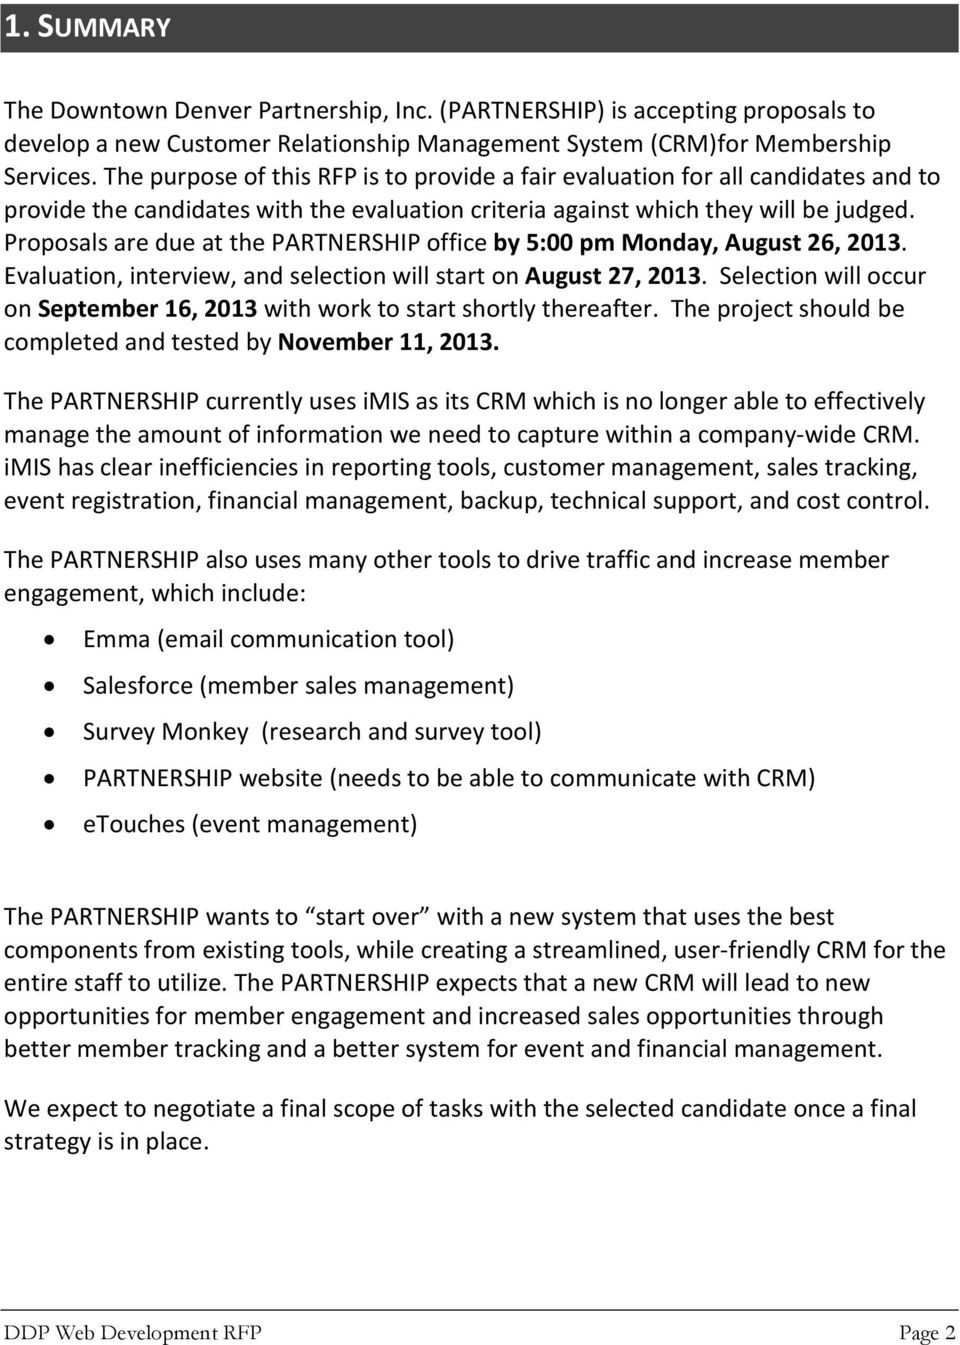 Proposals are due at the PARTNERSHIP office by 5:00 pm Monday, August 26, 2013. Evaluation, interview, and selection will start on August 27, 2013.